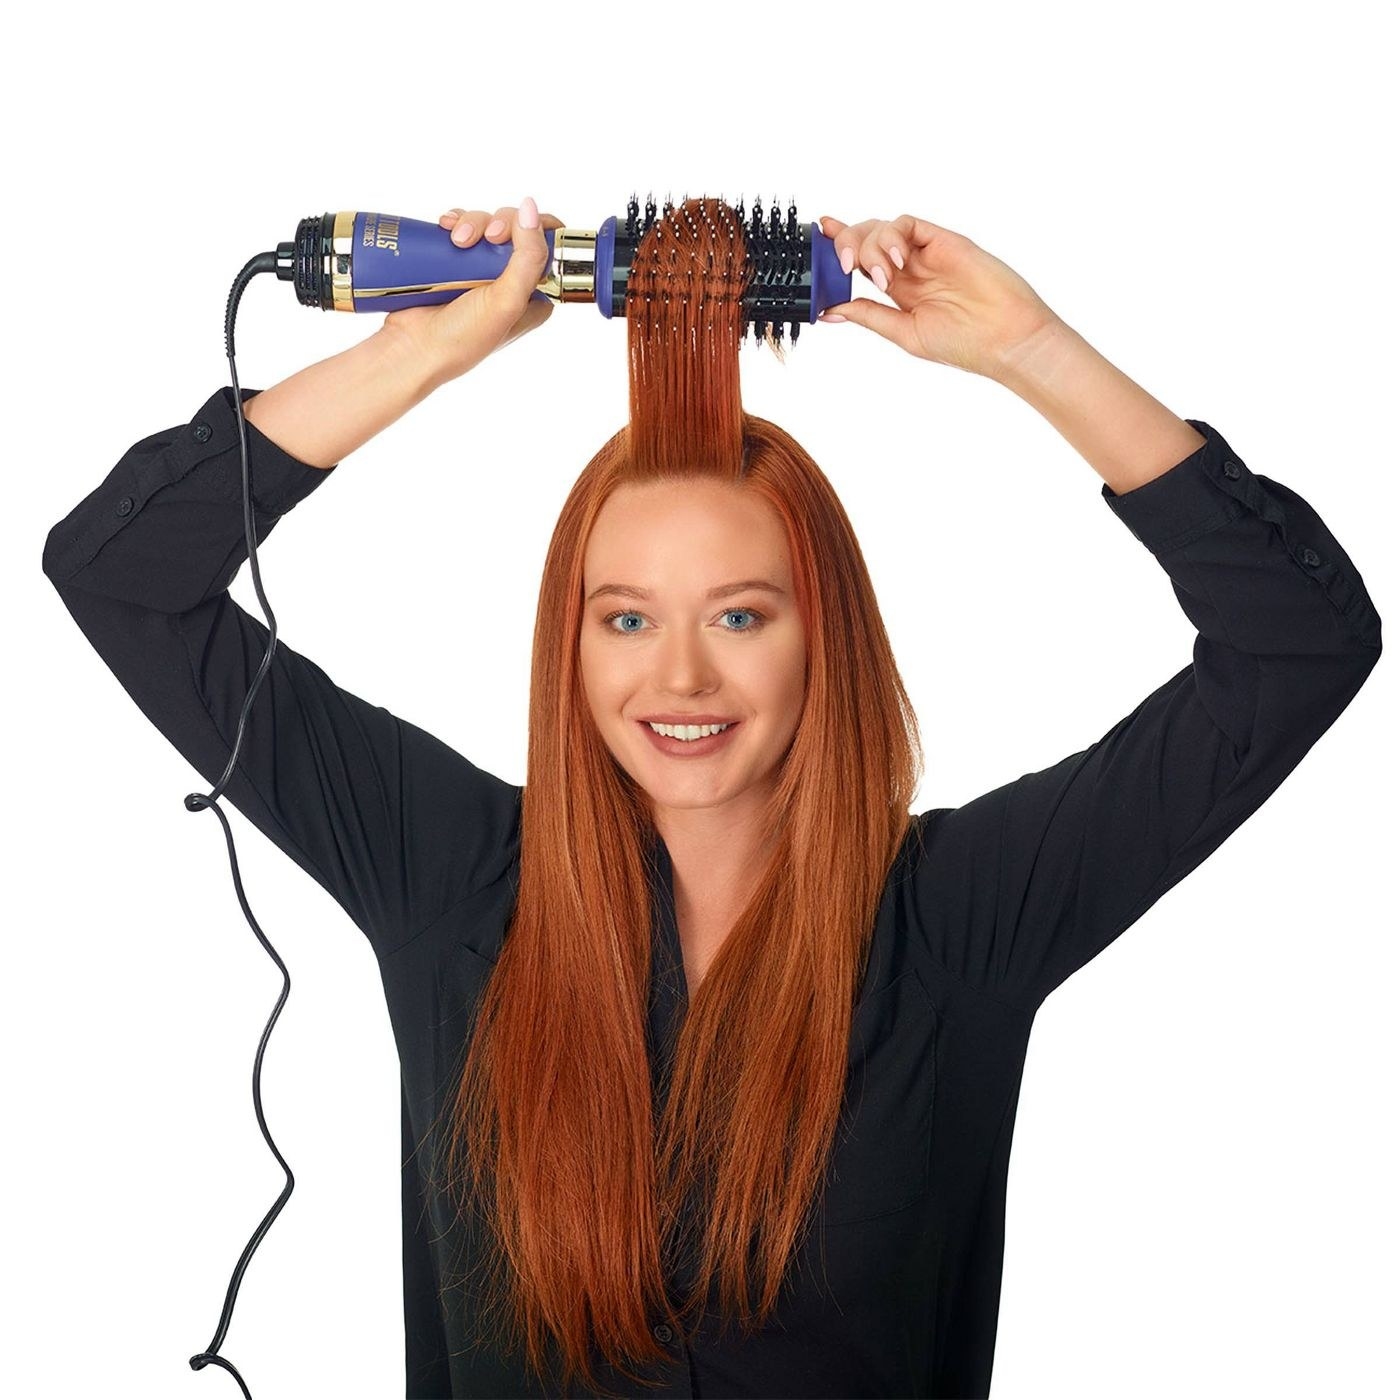 A model using the brush-shaped hair dryer